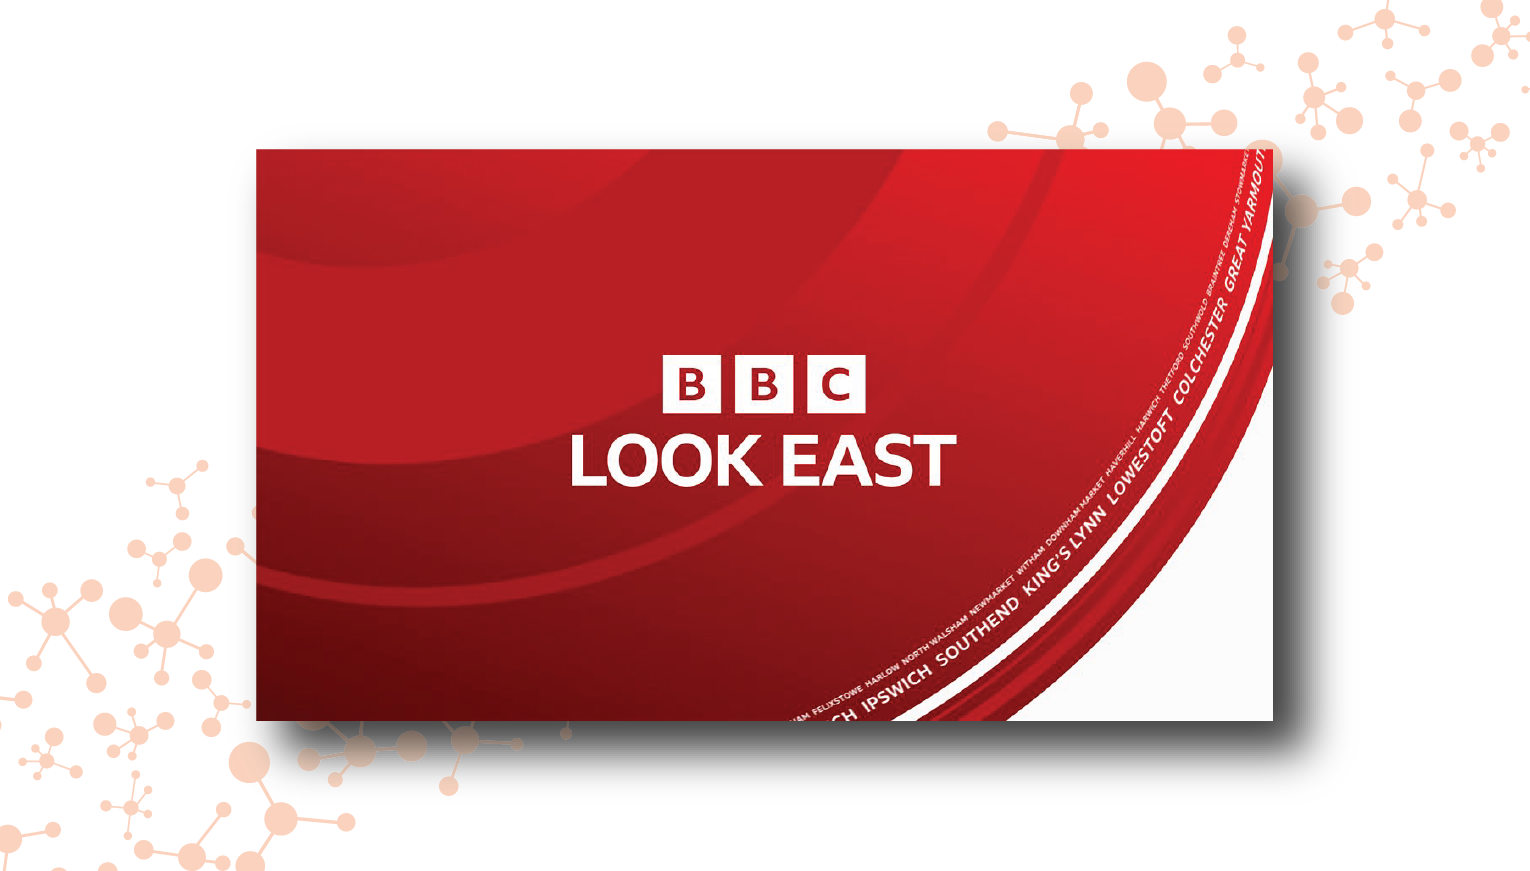 Owlstone Medical featured on BBC Look East